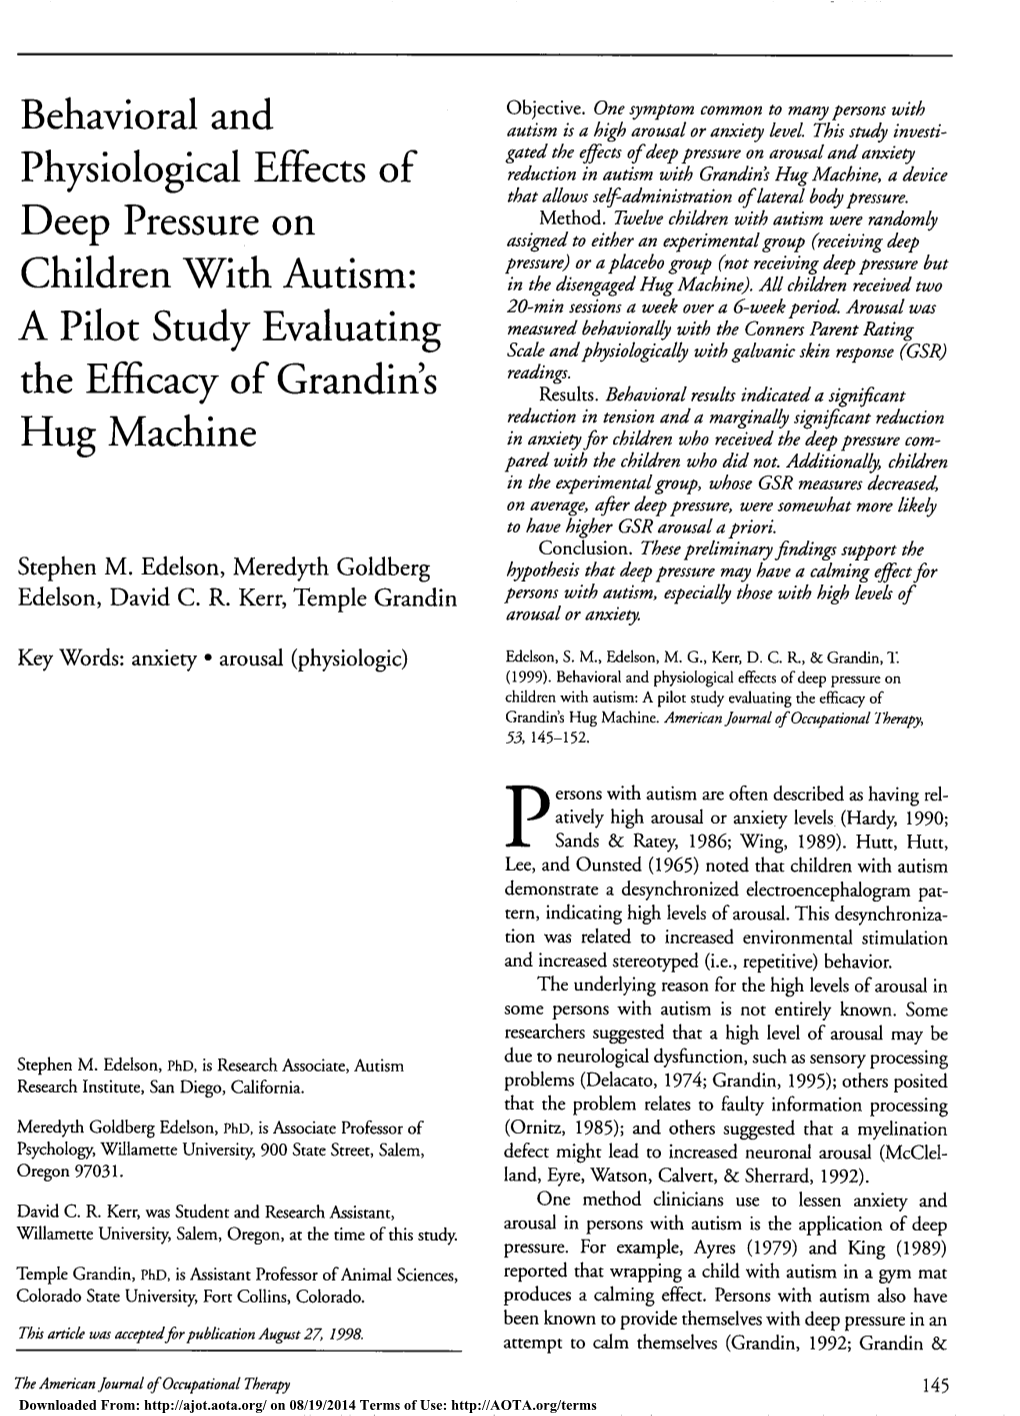 Behavioral and Physiological Effects of Deep Pressure on Children with Autism: a Pilot Study Evaluating the Efficacy of Grandin's Hug Machine